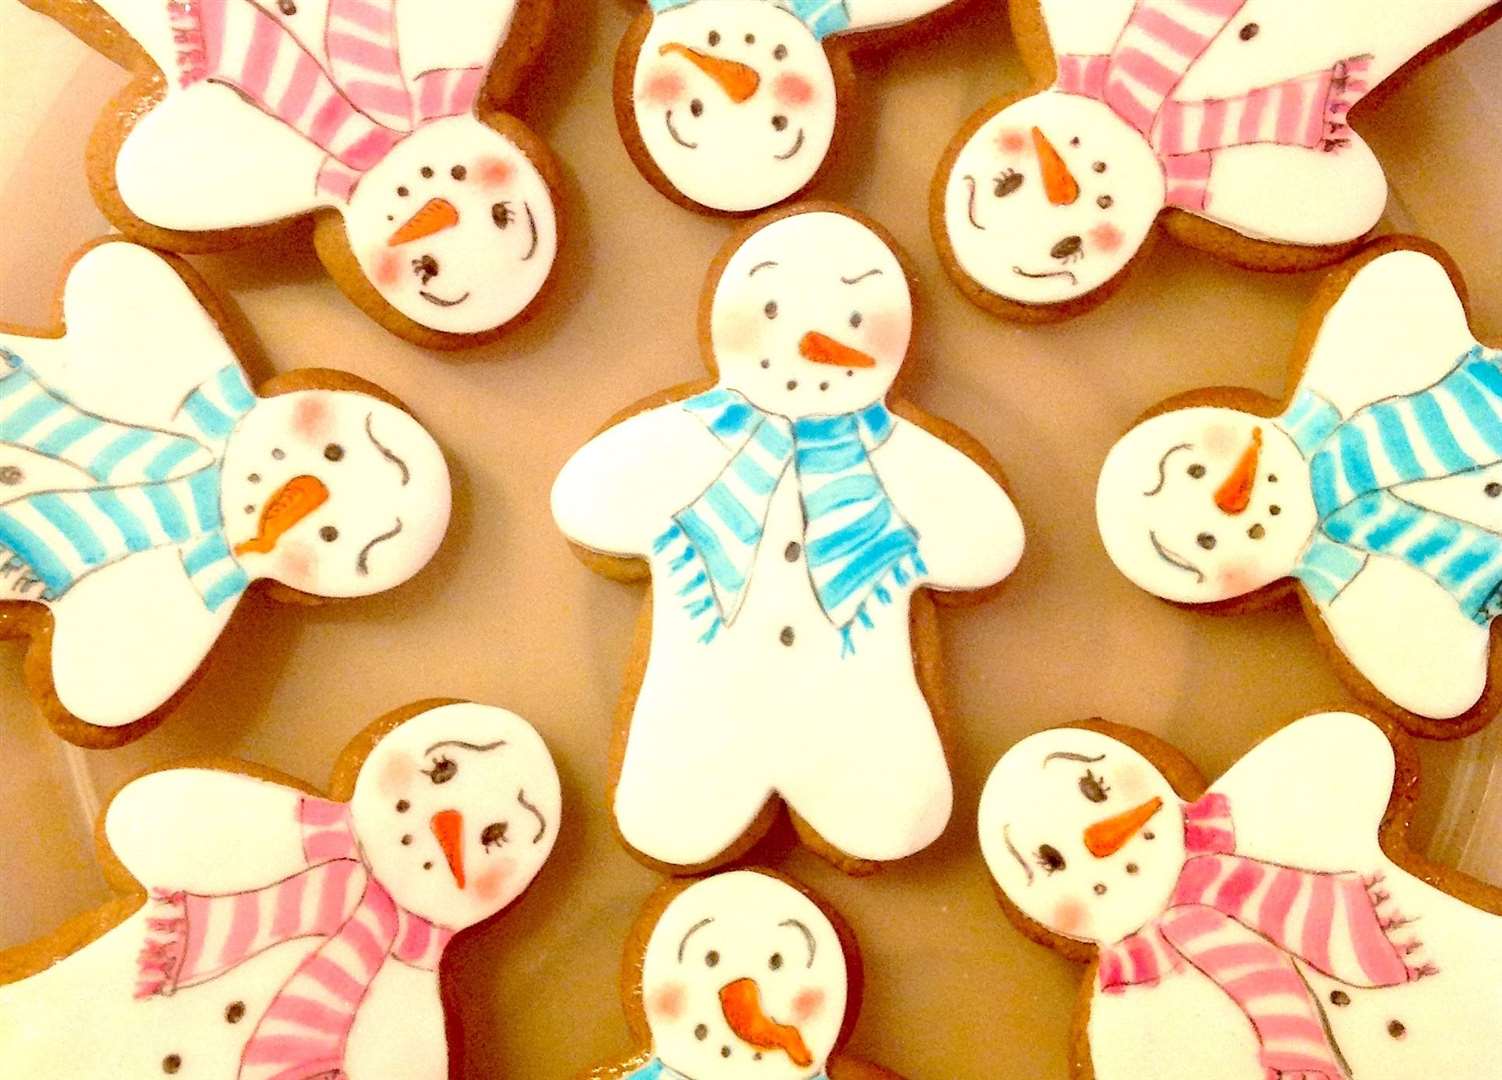 Snowmen by the Ticklebelly Bakehouse in Hernhill features in the display